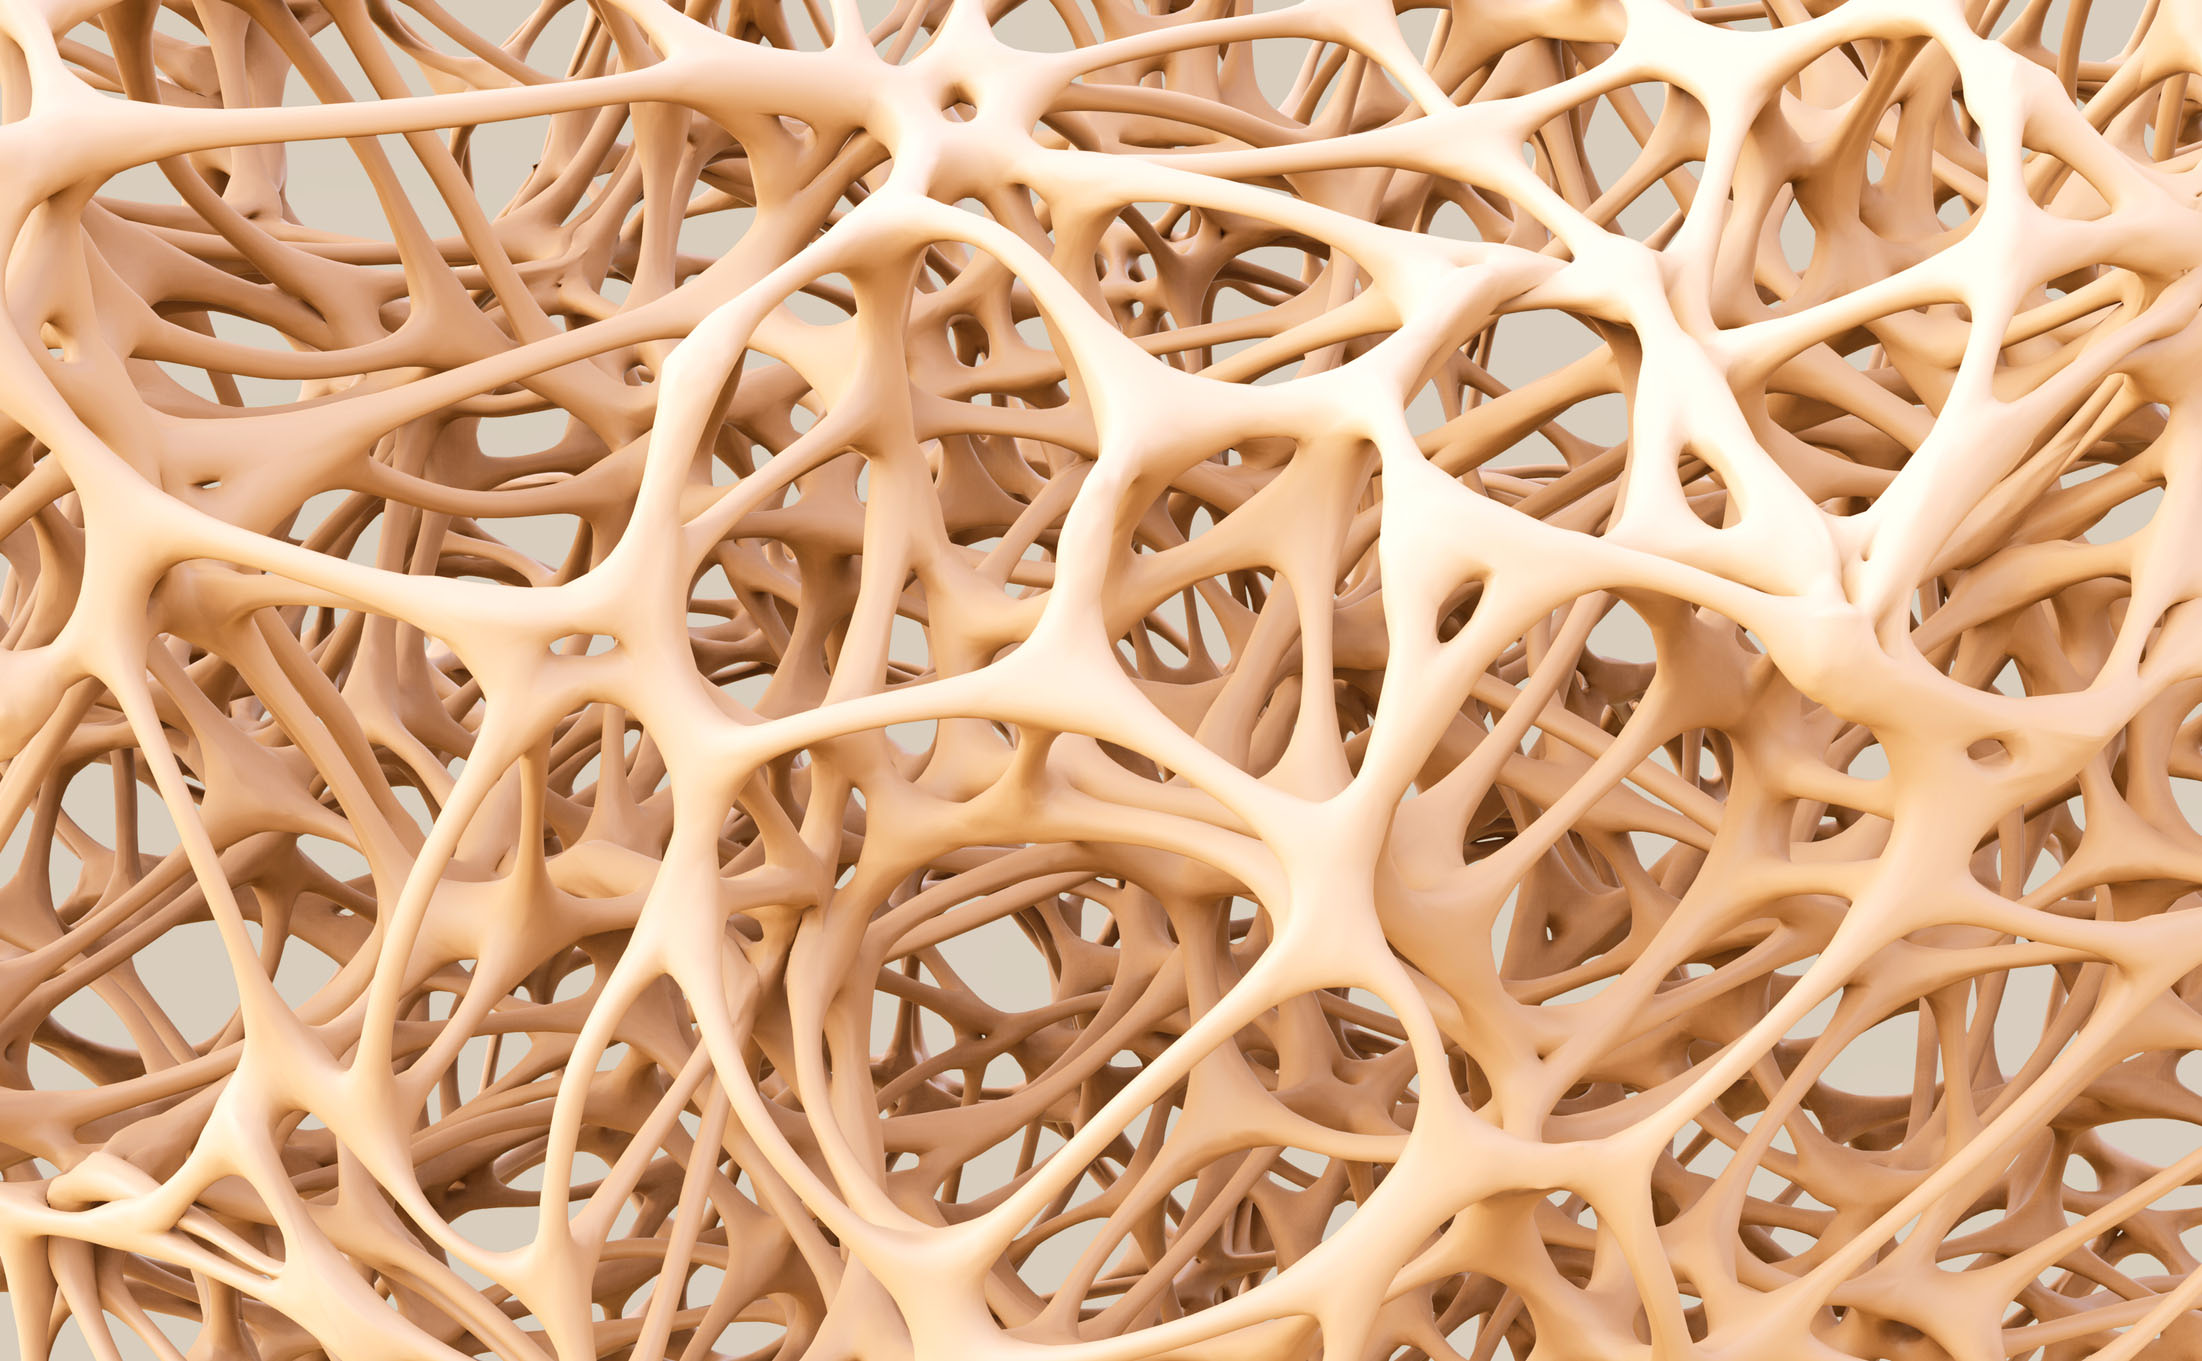 Abstract illustration of bone structure